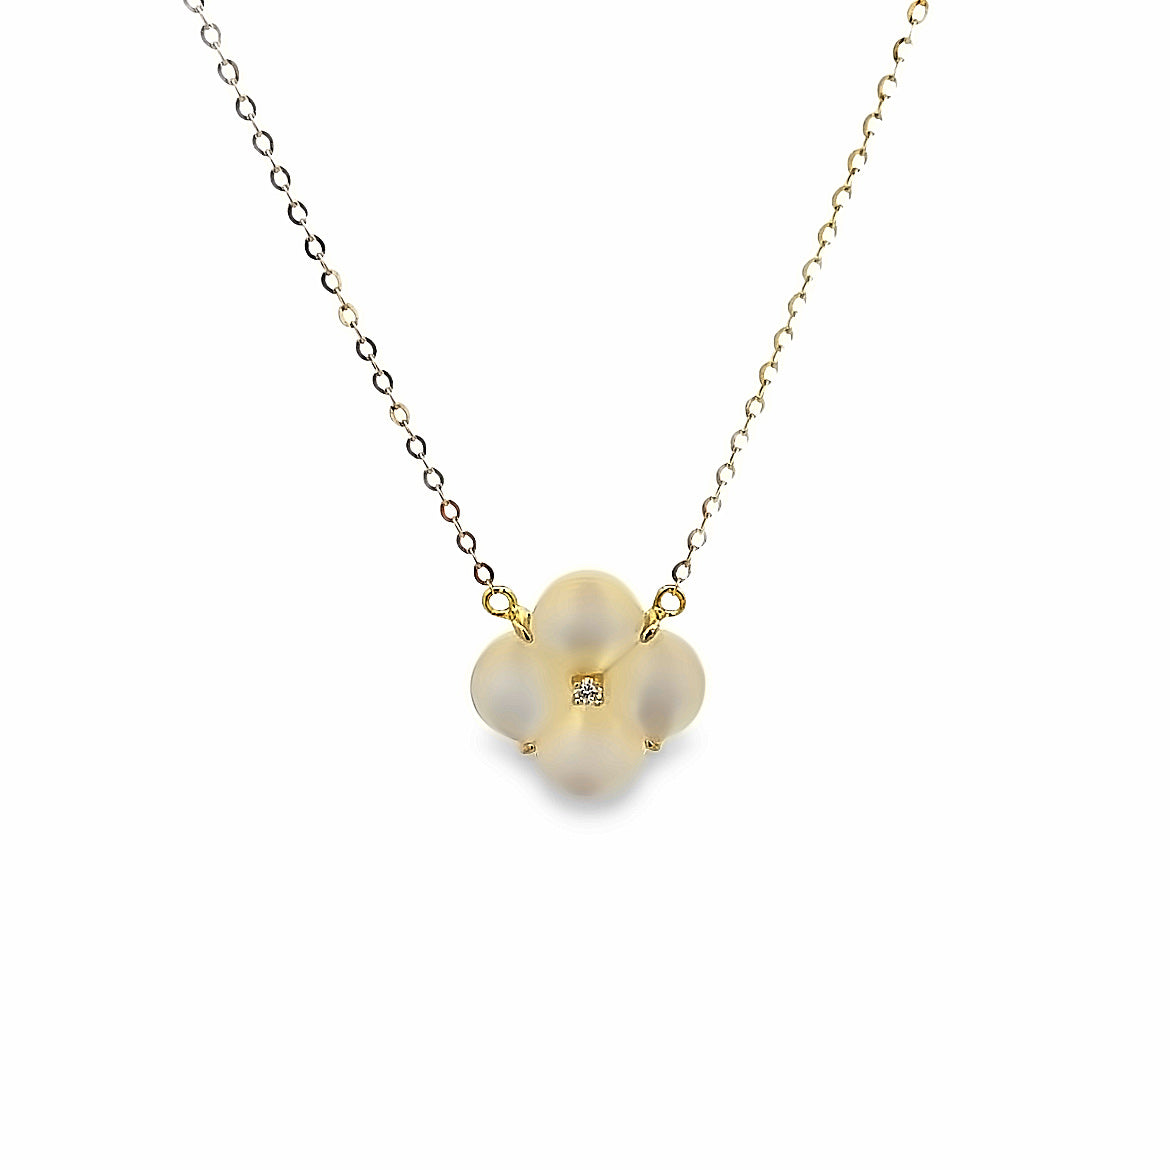 18K GOLD FLOWER MEDIUM NECKLACE WITH MOTHER OF PEARL